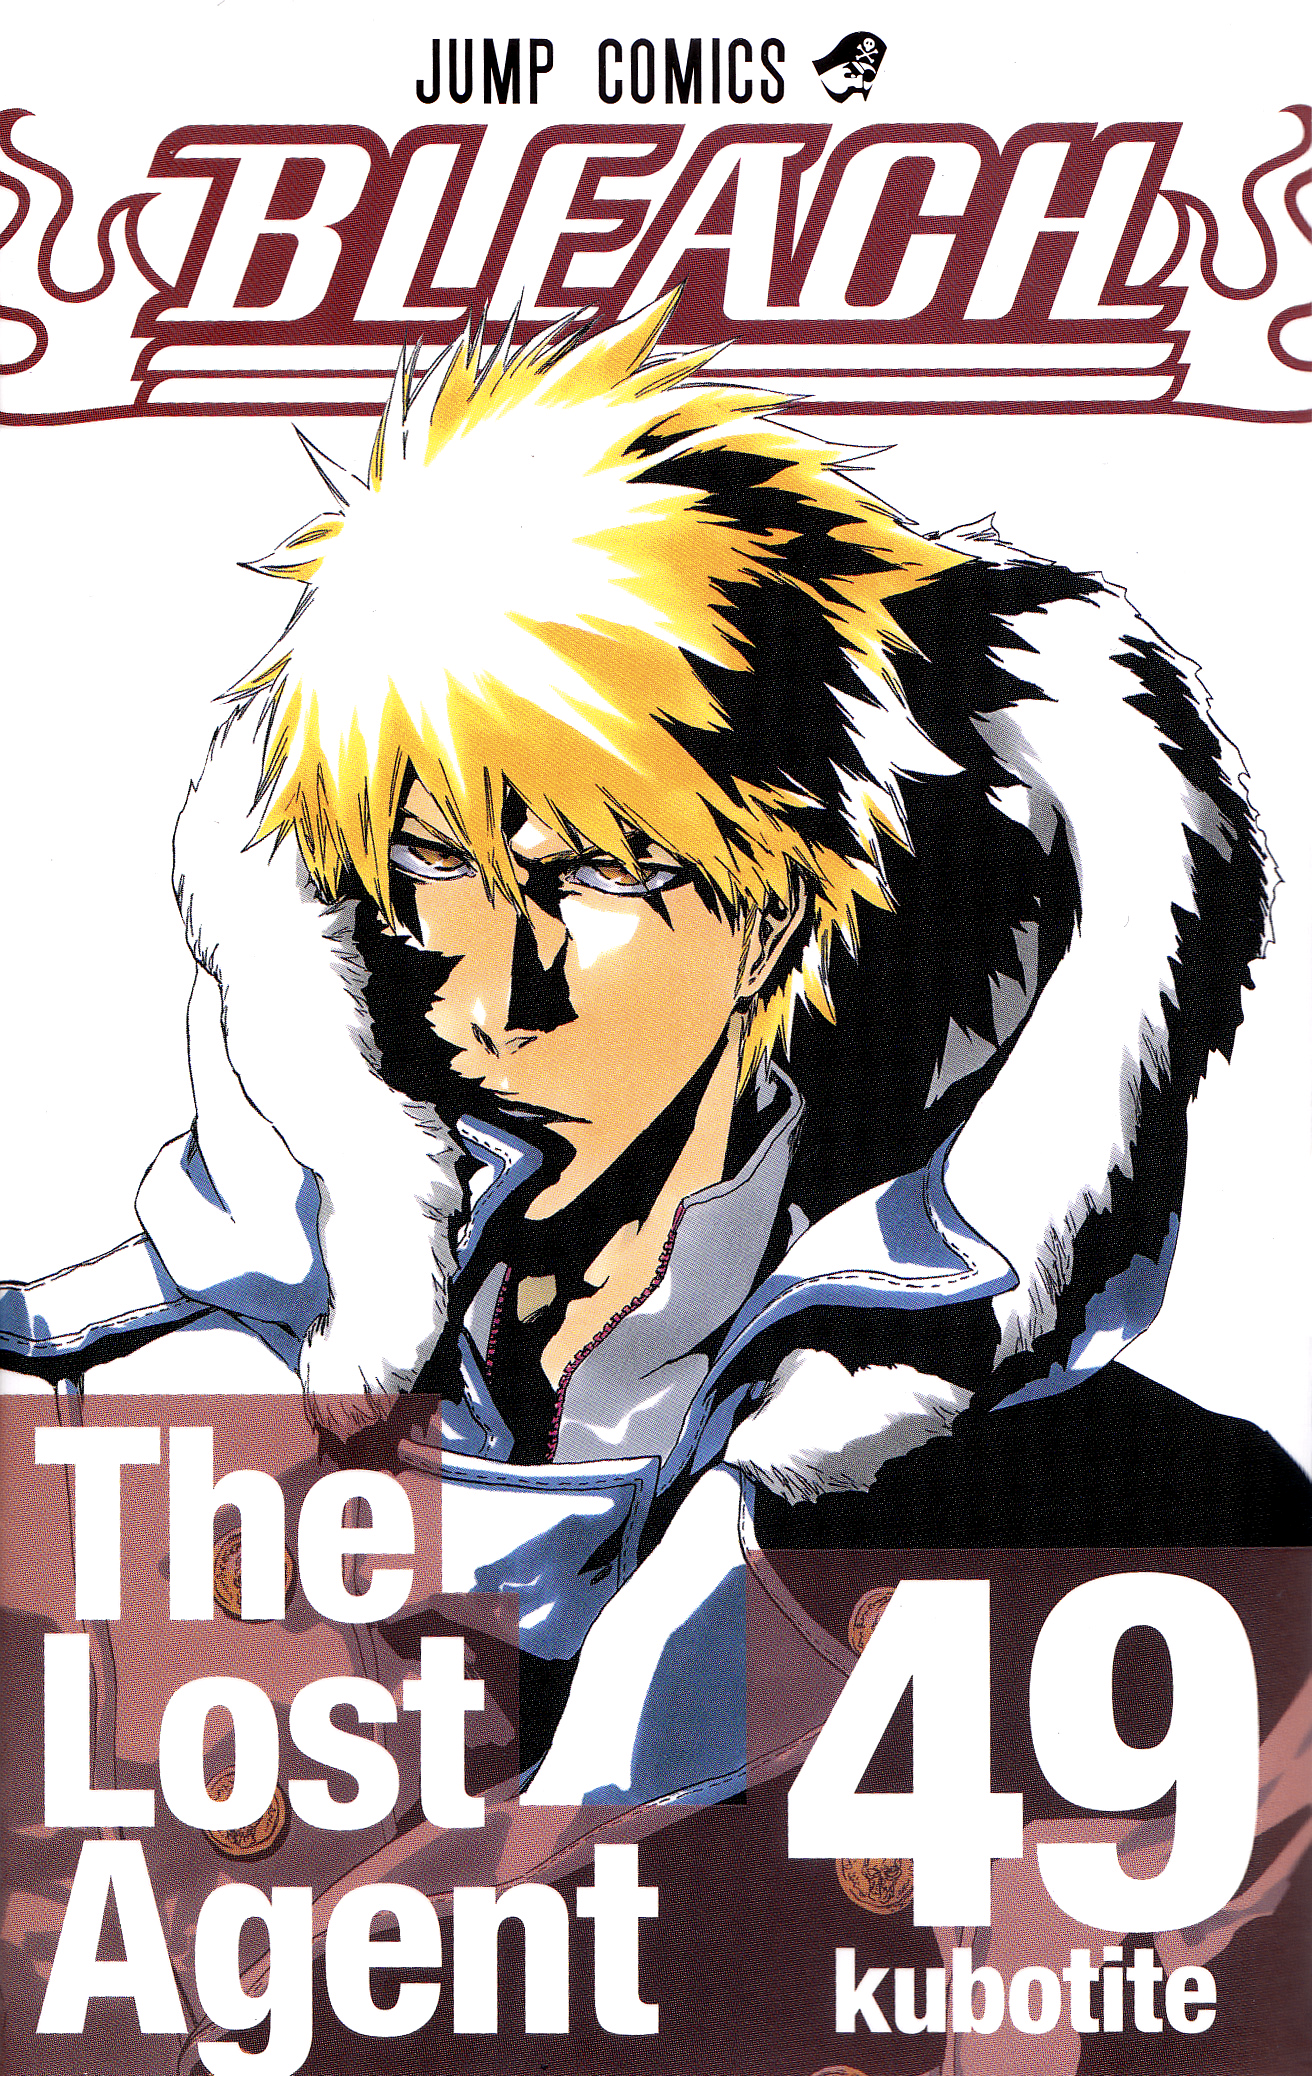 Will Bleach author Tite Kubo resume the Hell Arc?